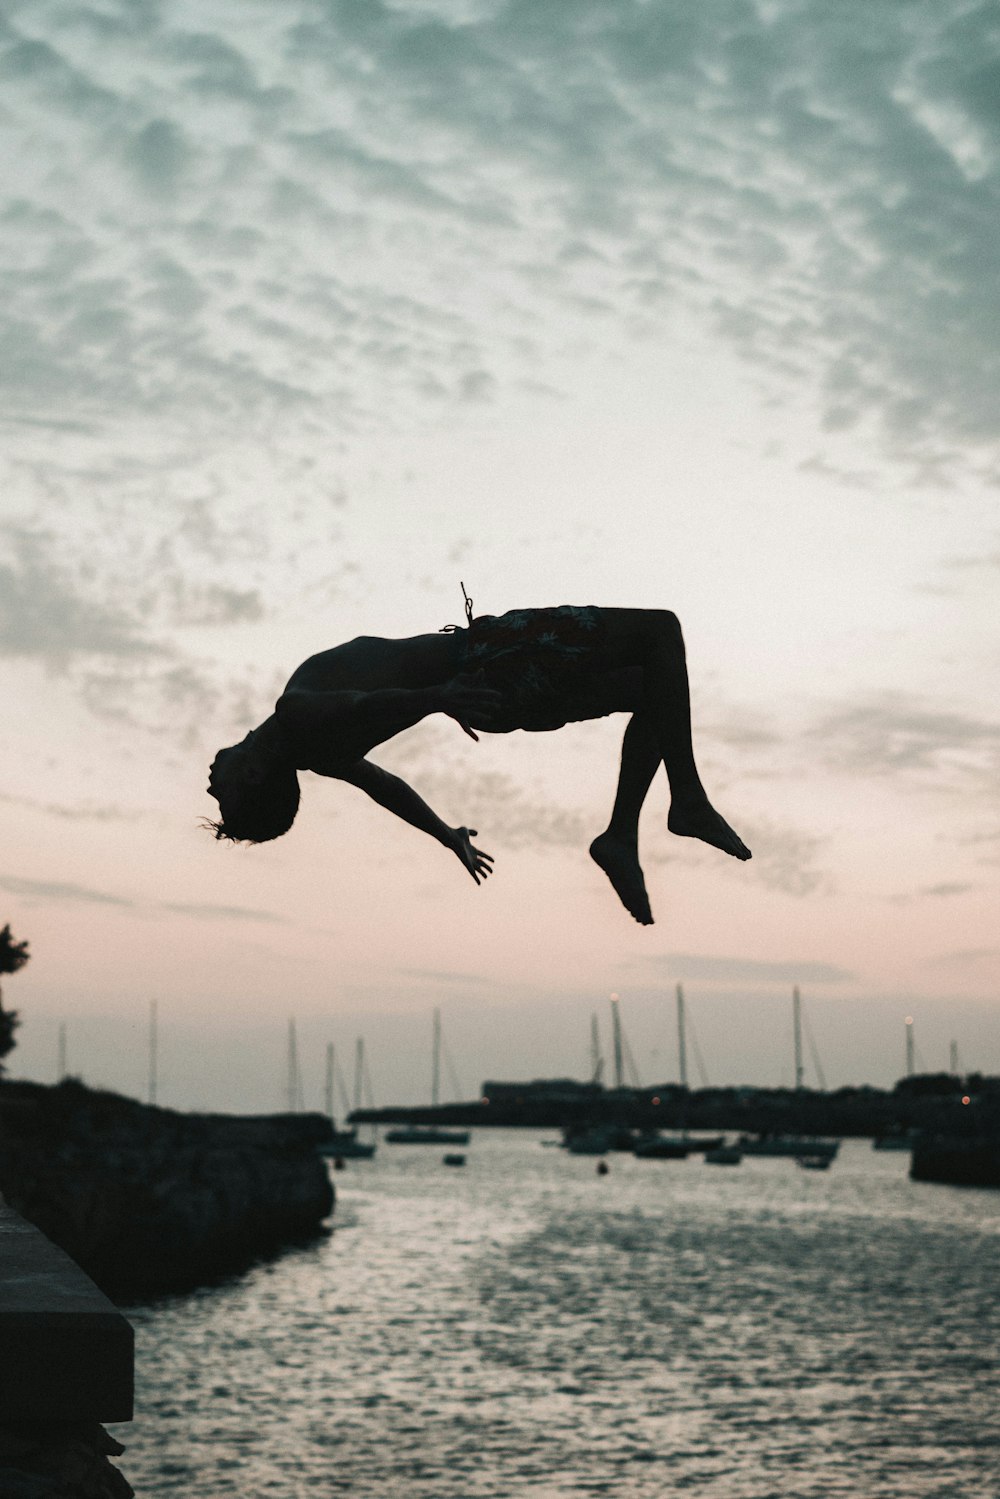 a person jumping into the air from a dock